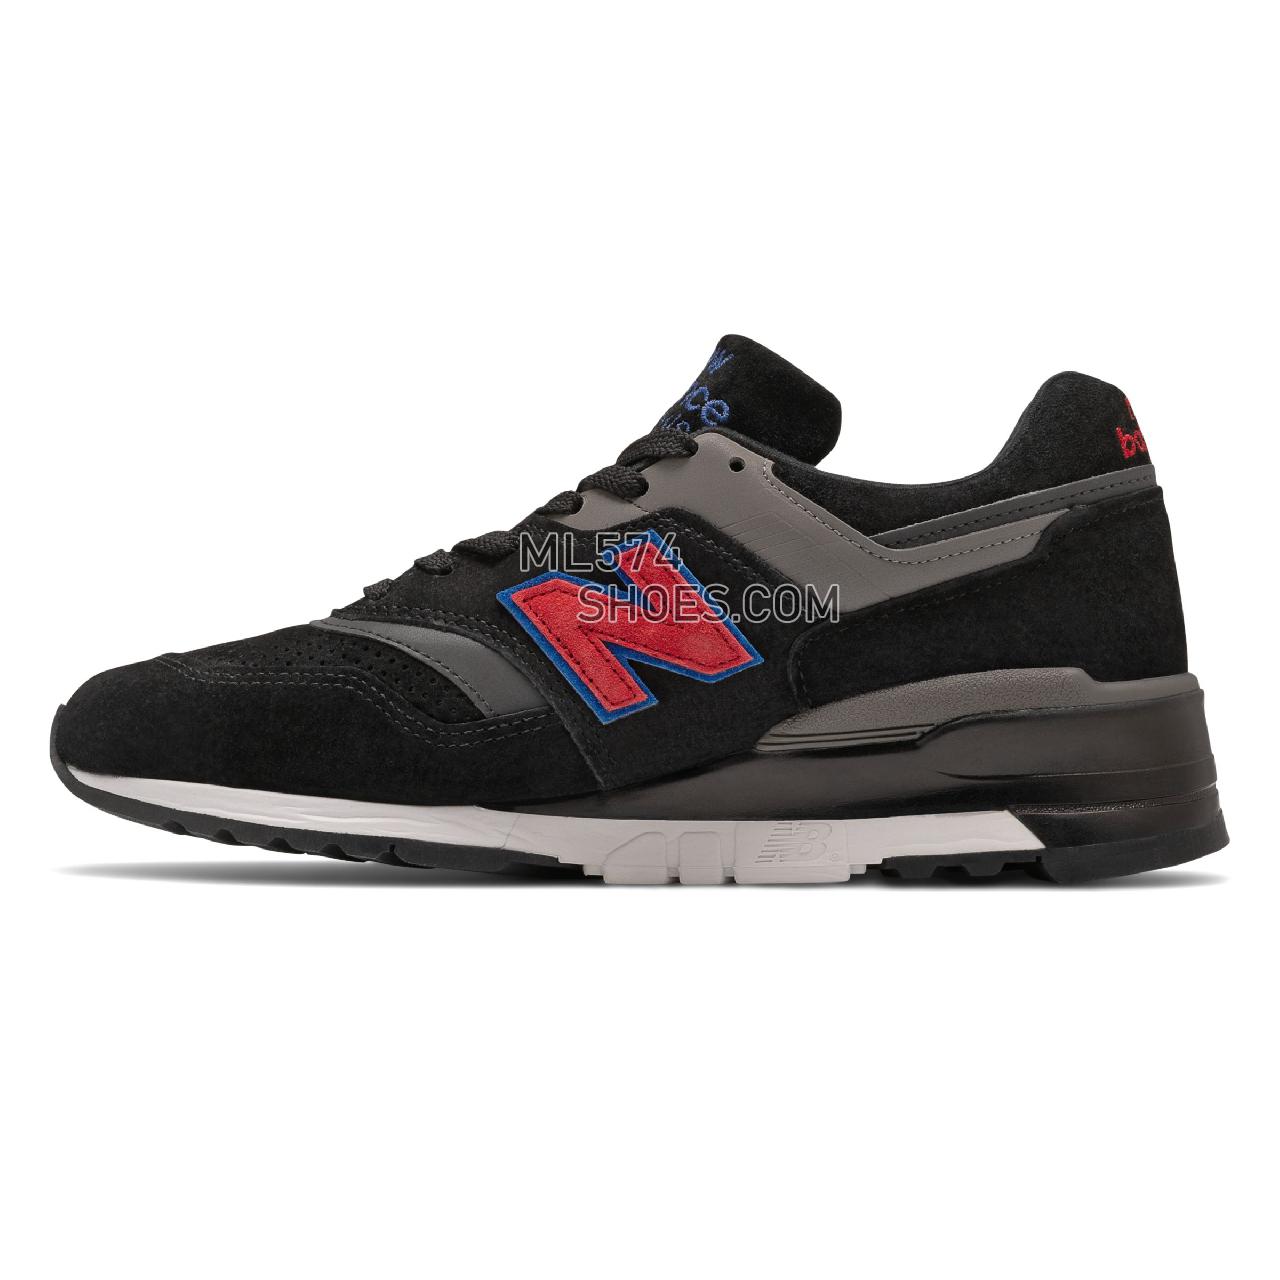 New Balance Made in US 997 - Men's Made in USA And UK Sneakers - Black with Red - M997BB2